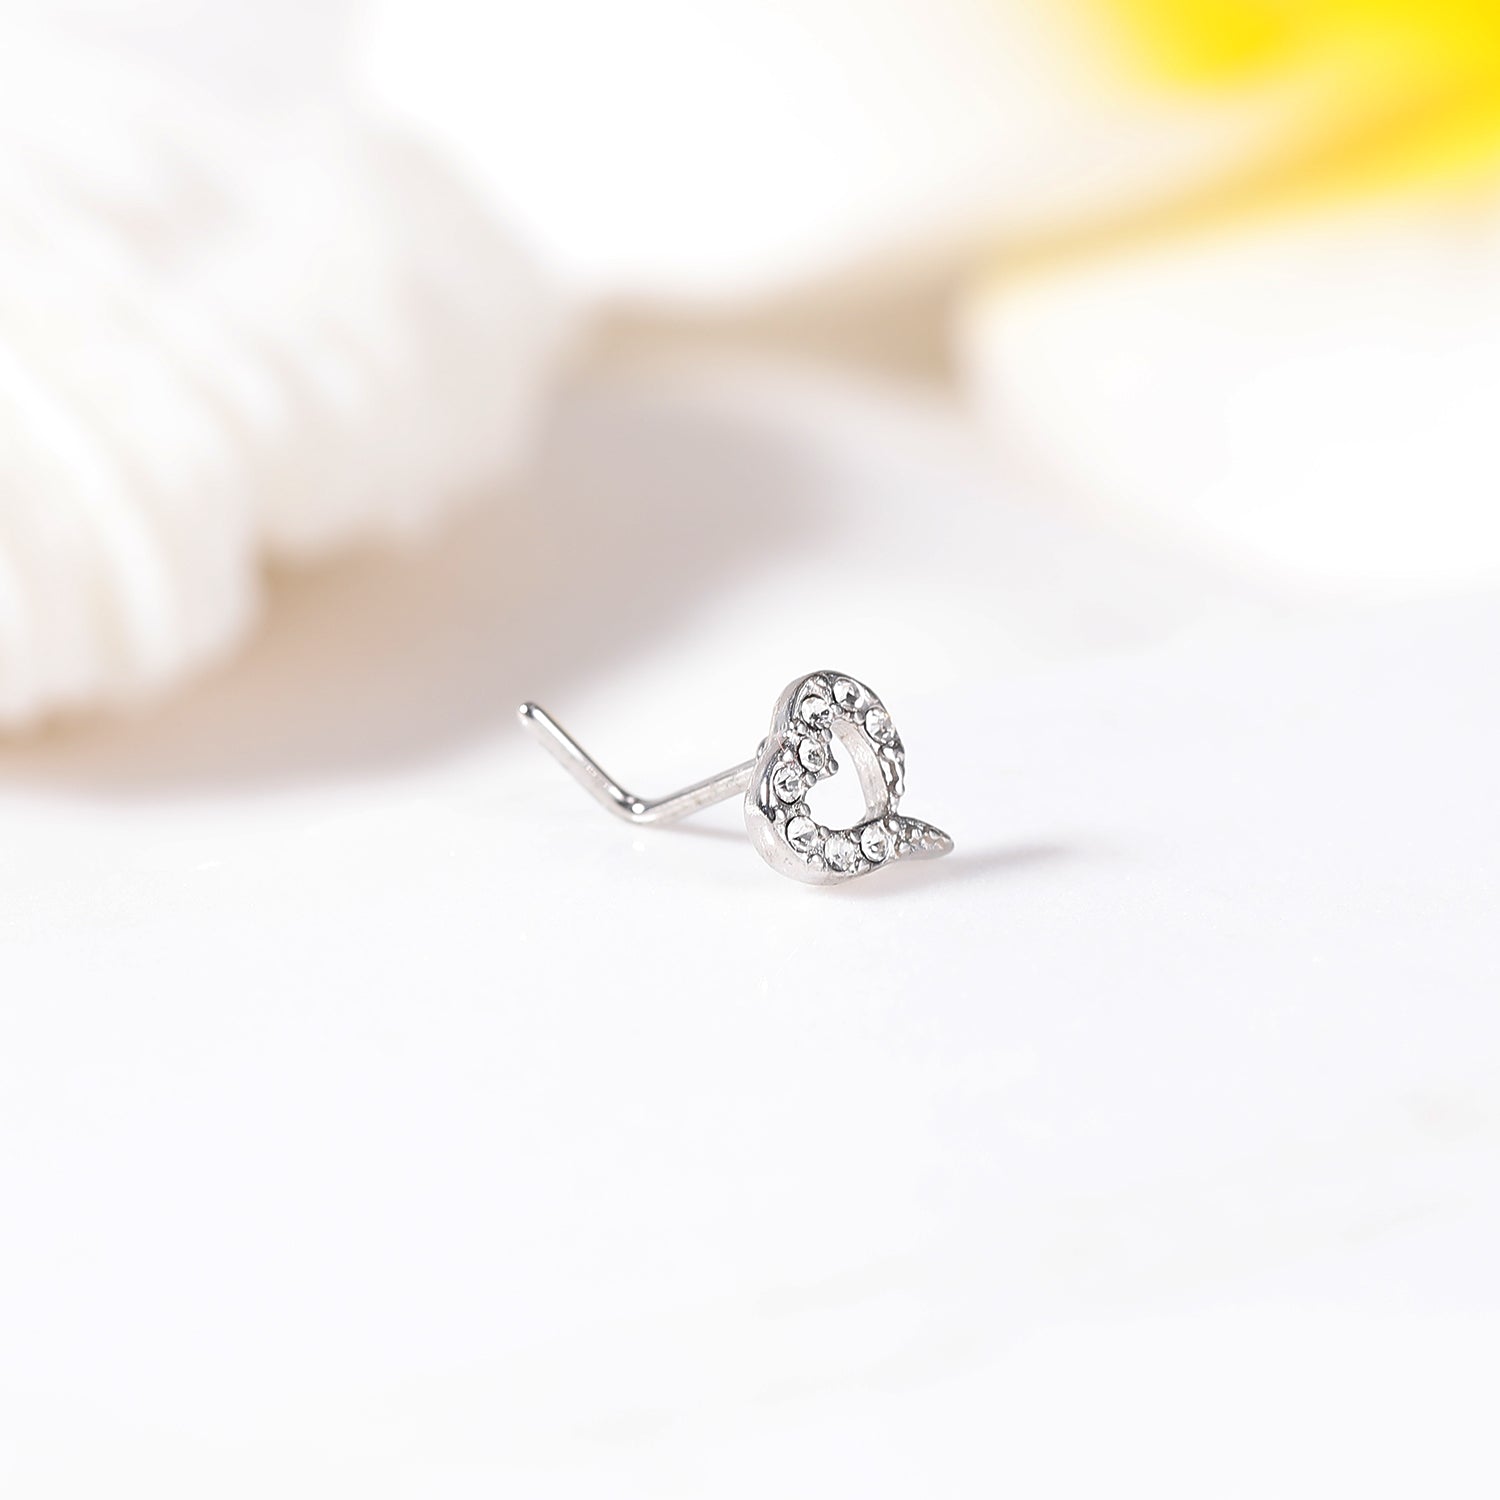 20g-copper-heart-nose-stud-piercing-l-shaped-nostril-piercing-white-crystal